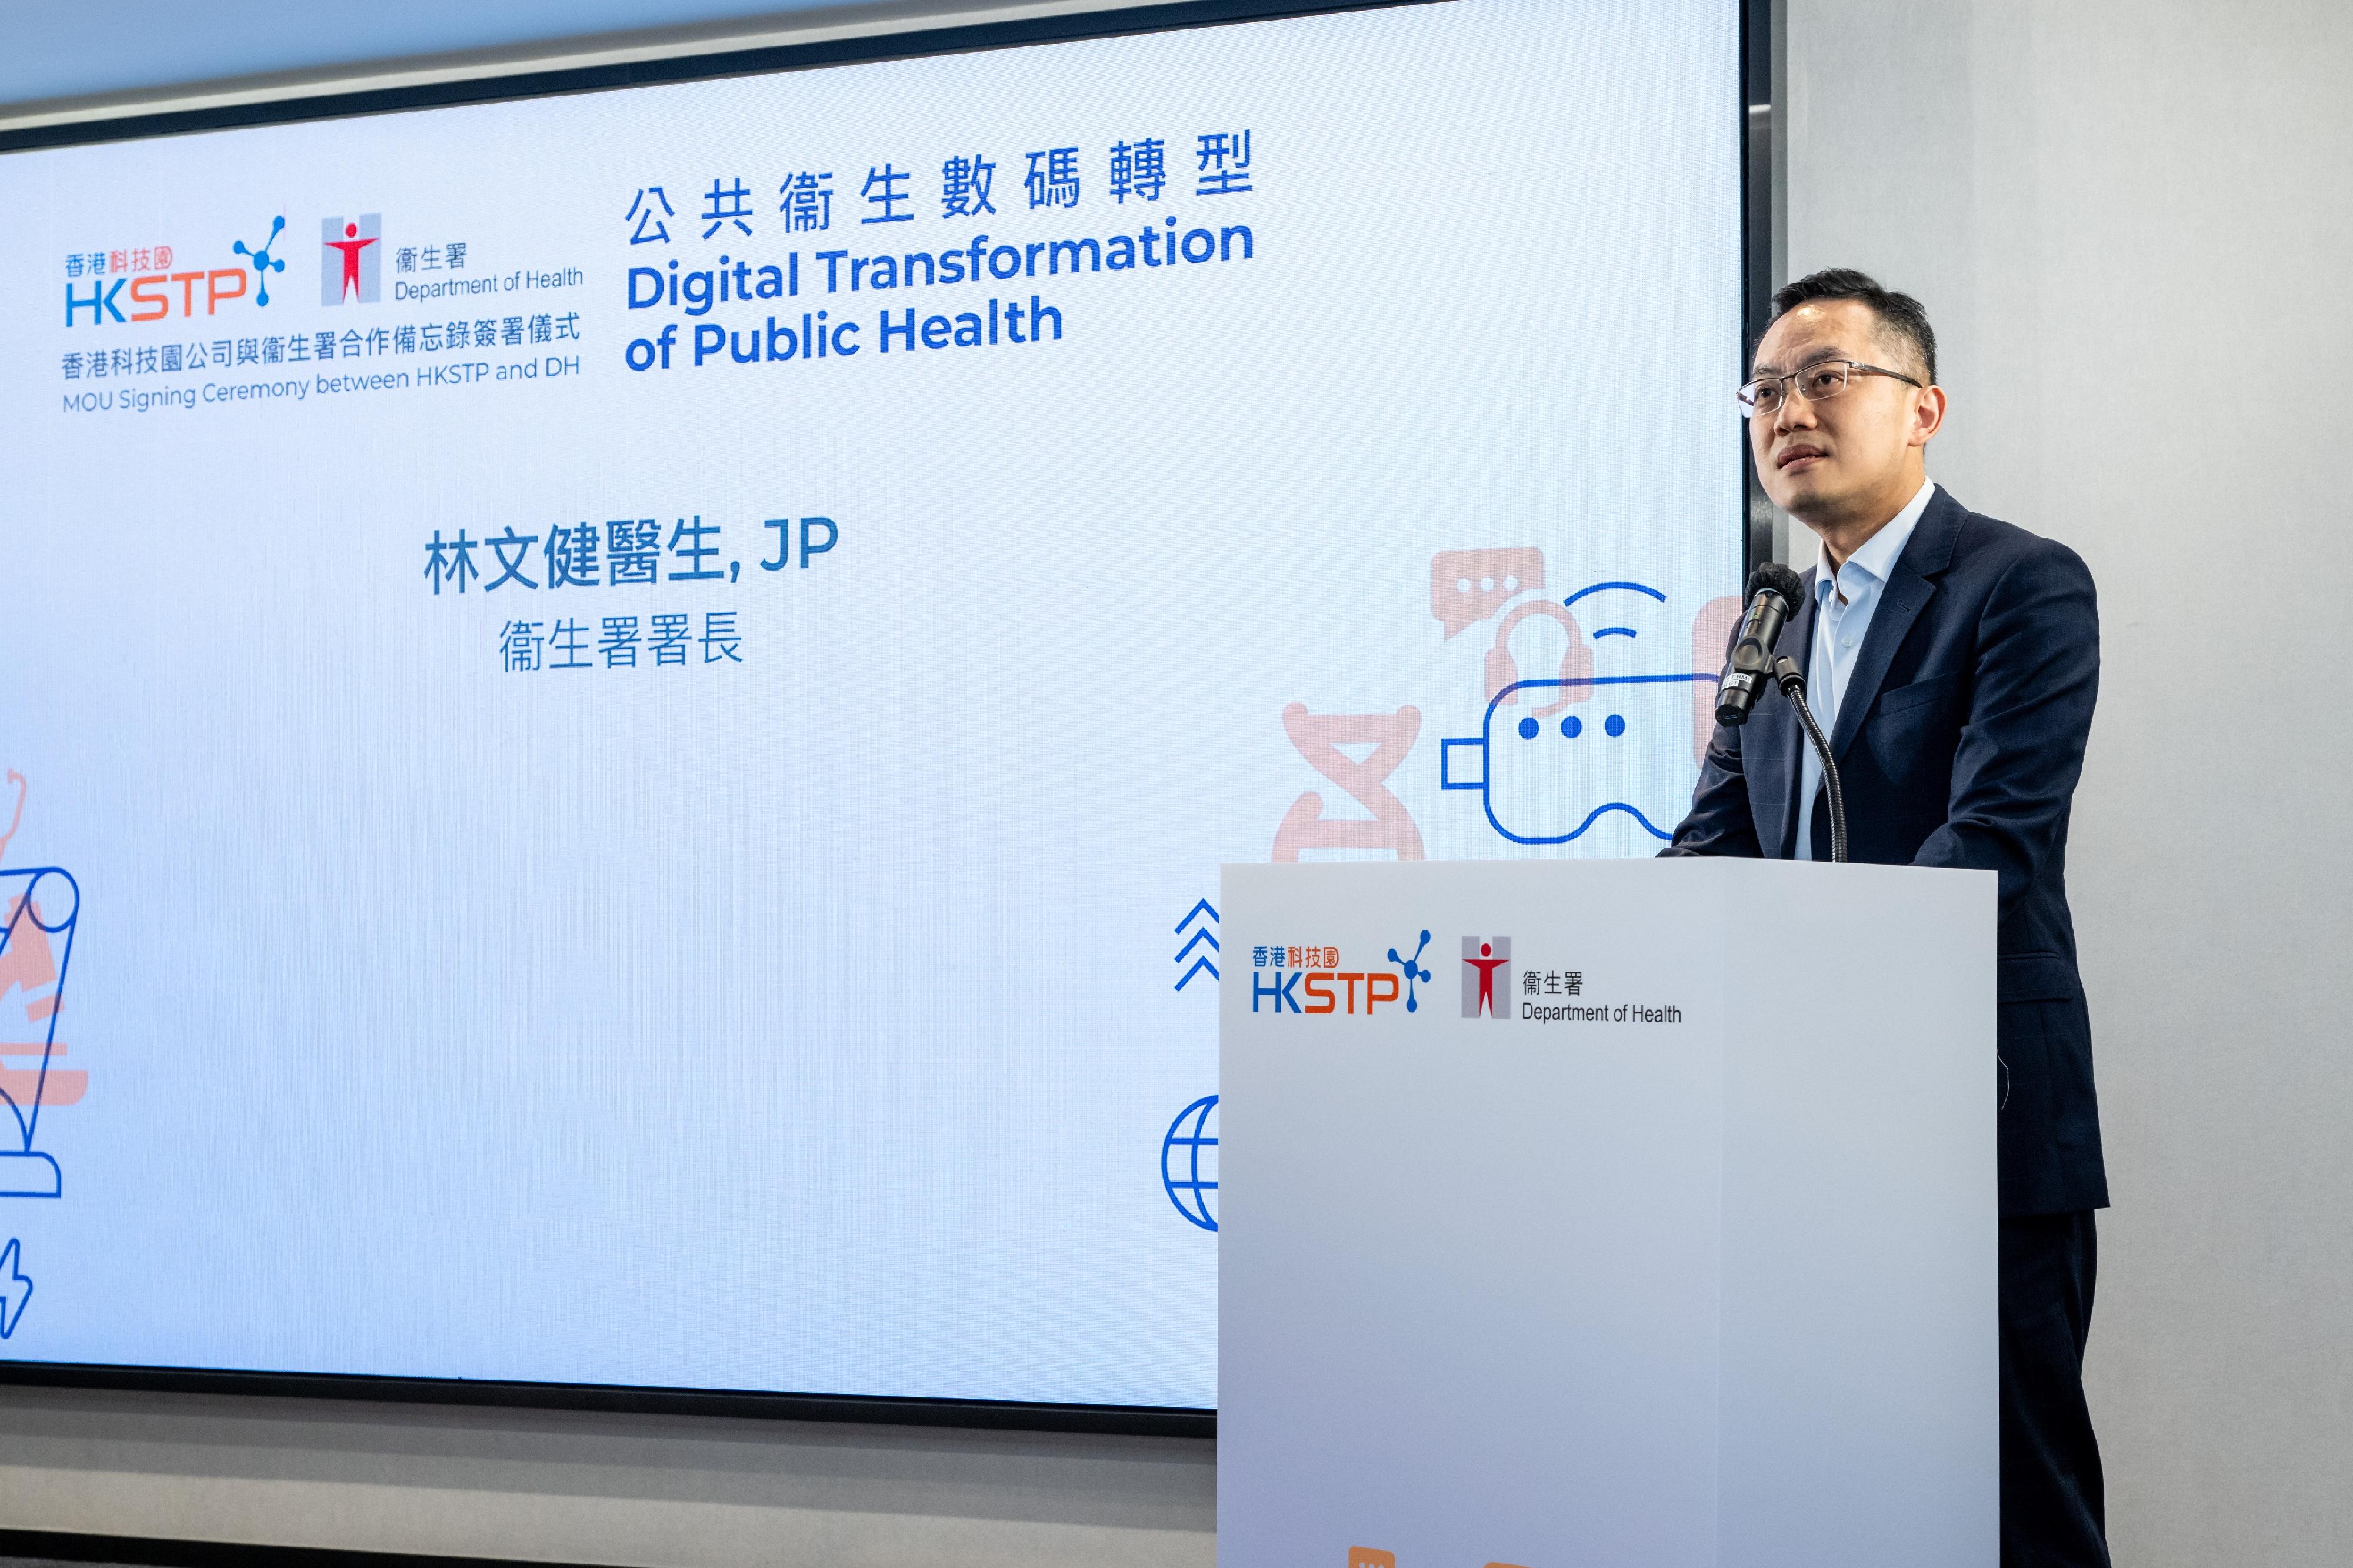 The Department of Health and the Hong Kong Science and Technology Parks Corporation signed a Memorandum of Understanding today (August 18) which aims at leveraging the latest innovation and technology to expedite digitalisation for public health functions while fostering an innovation-driven culture in the healthcare sector. Photo shows the Director of Health, Dr Ronald Lam, delivering a speech at the signing ceremony.